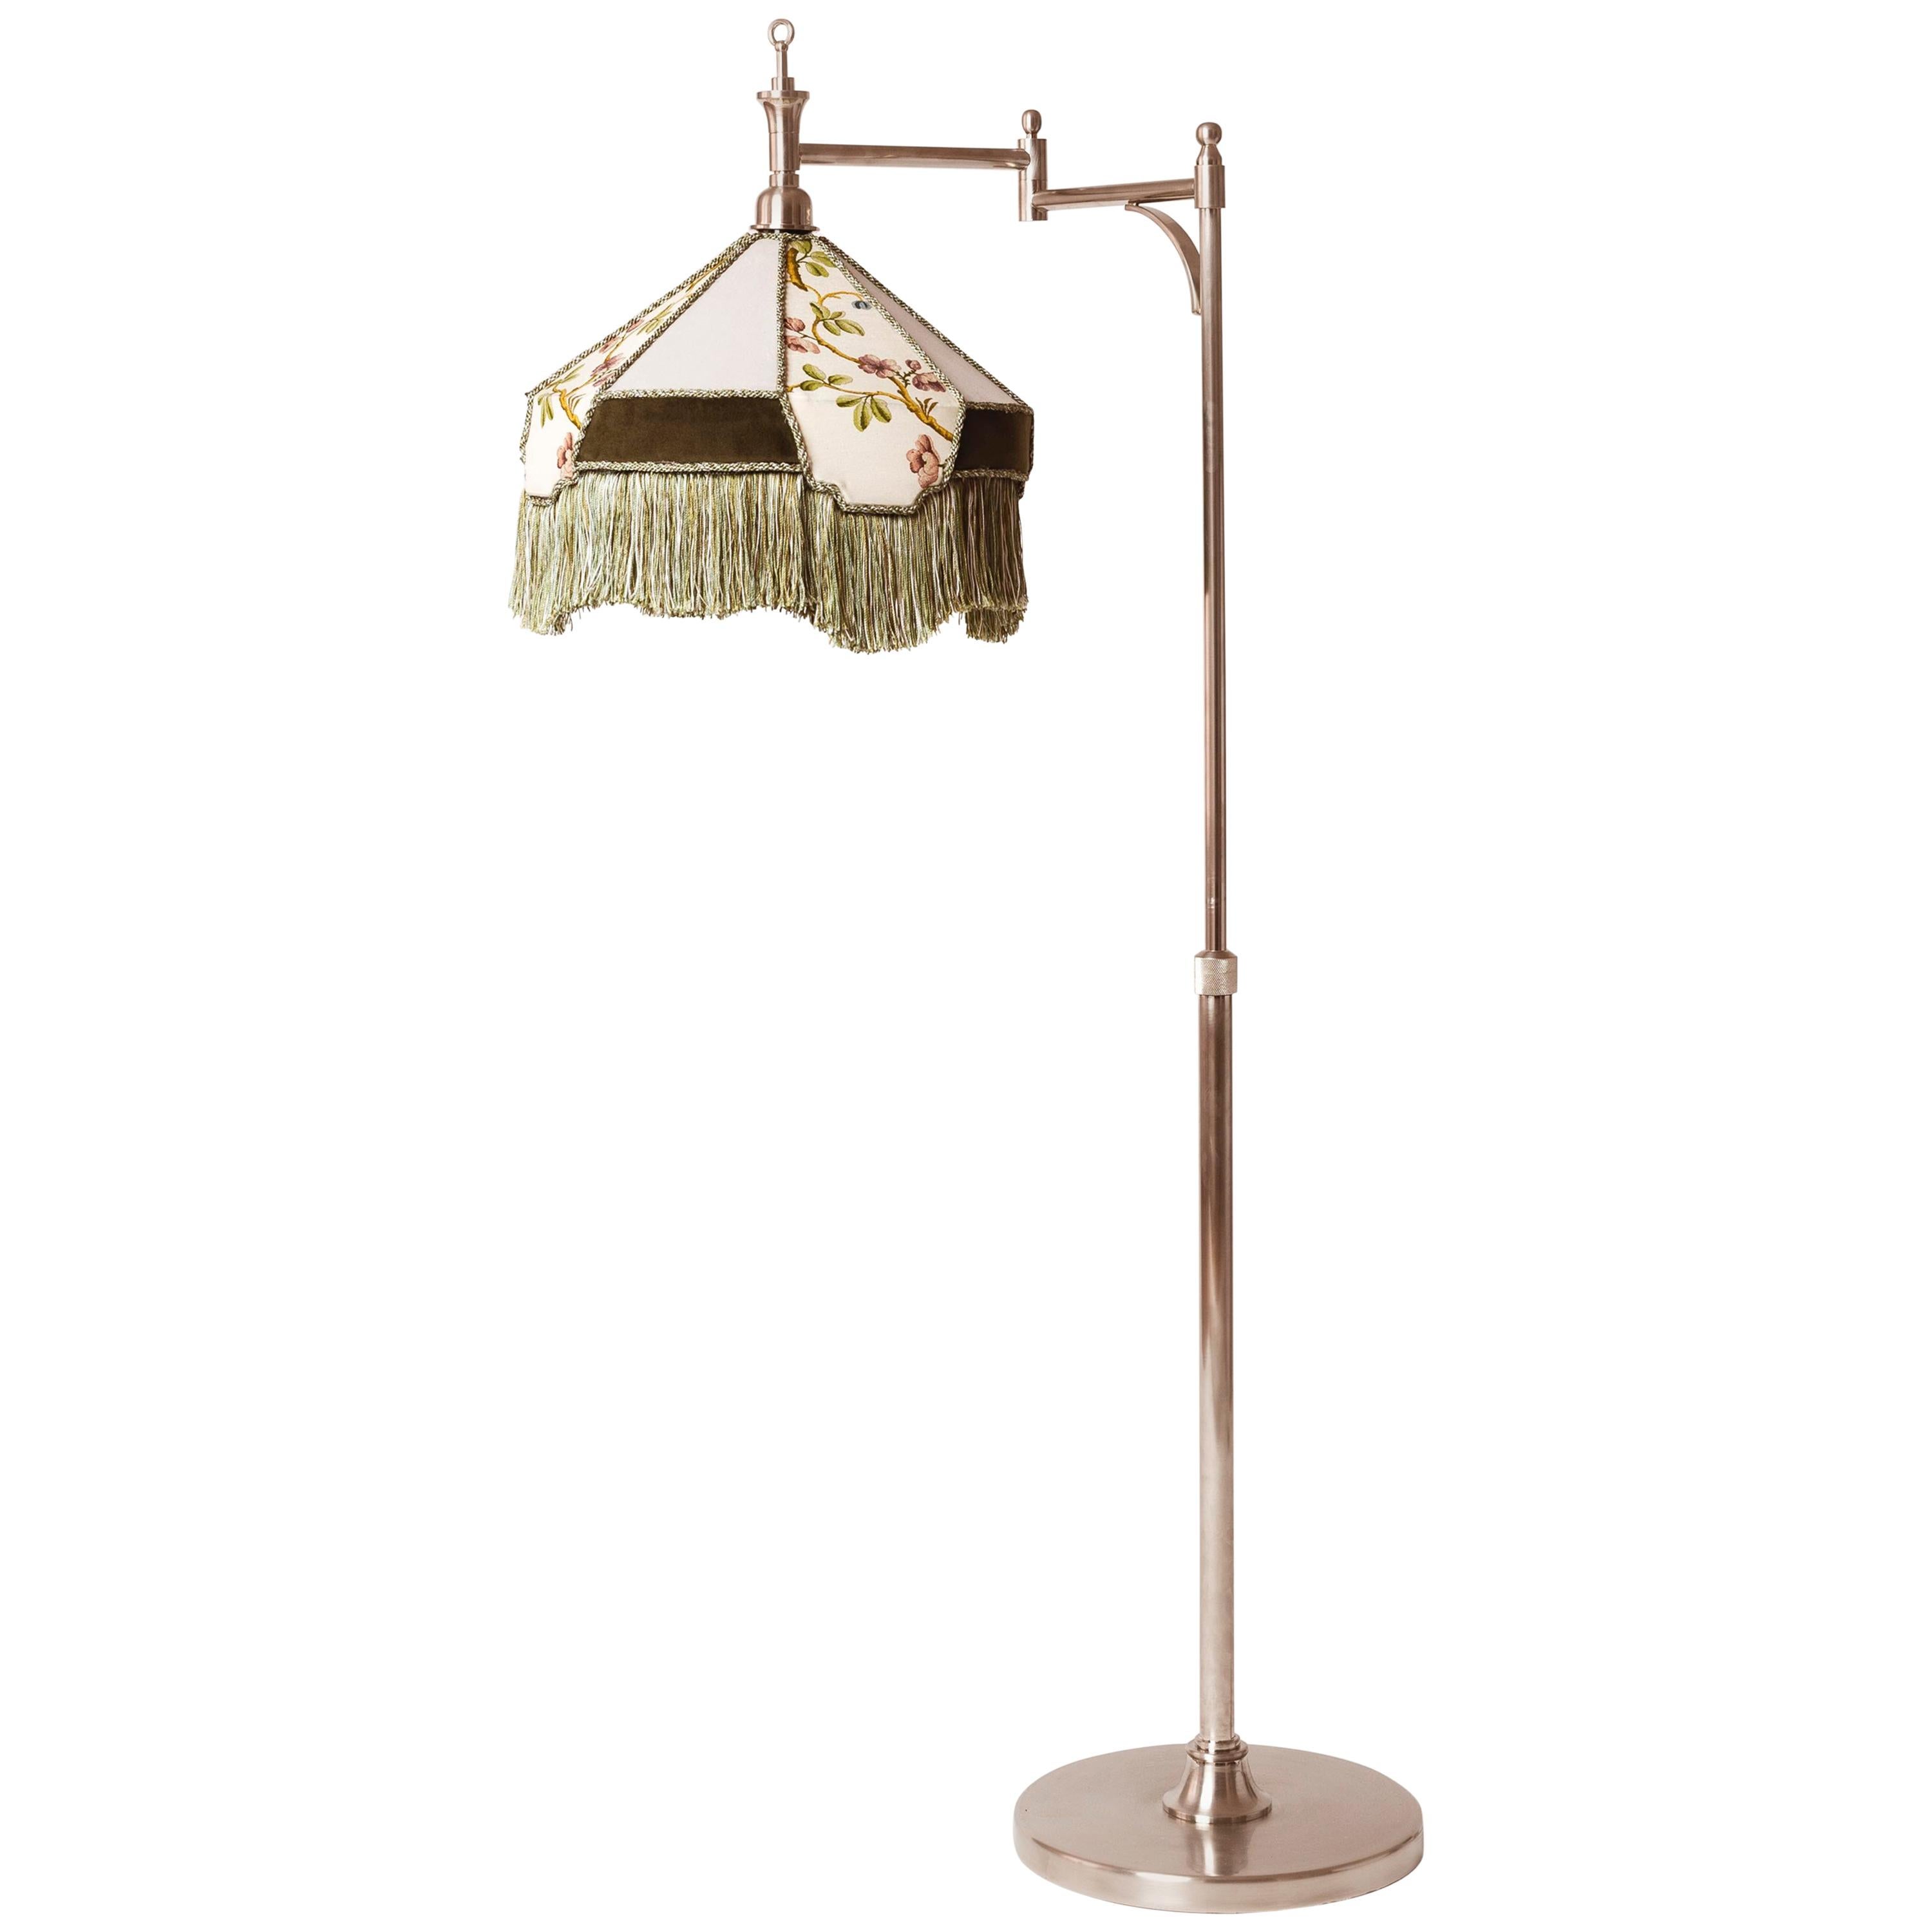 Art Deco Lamp in Brass, Finish in Polished Nickel, Lamp Shade with Embroidery 1